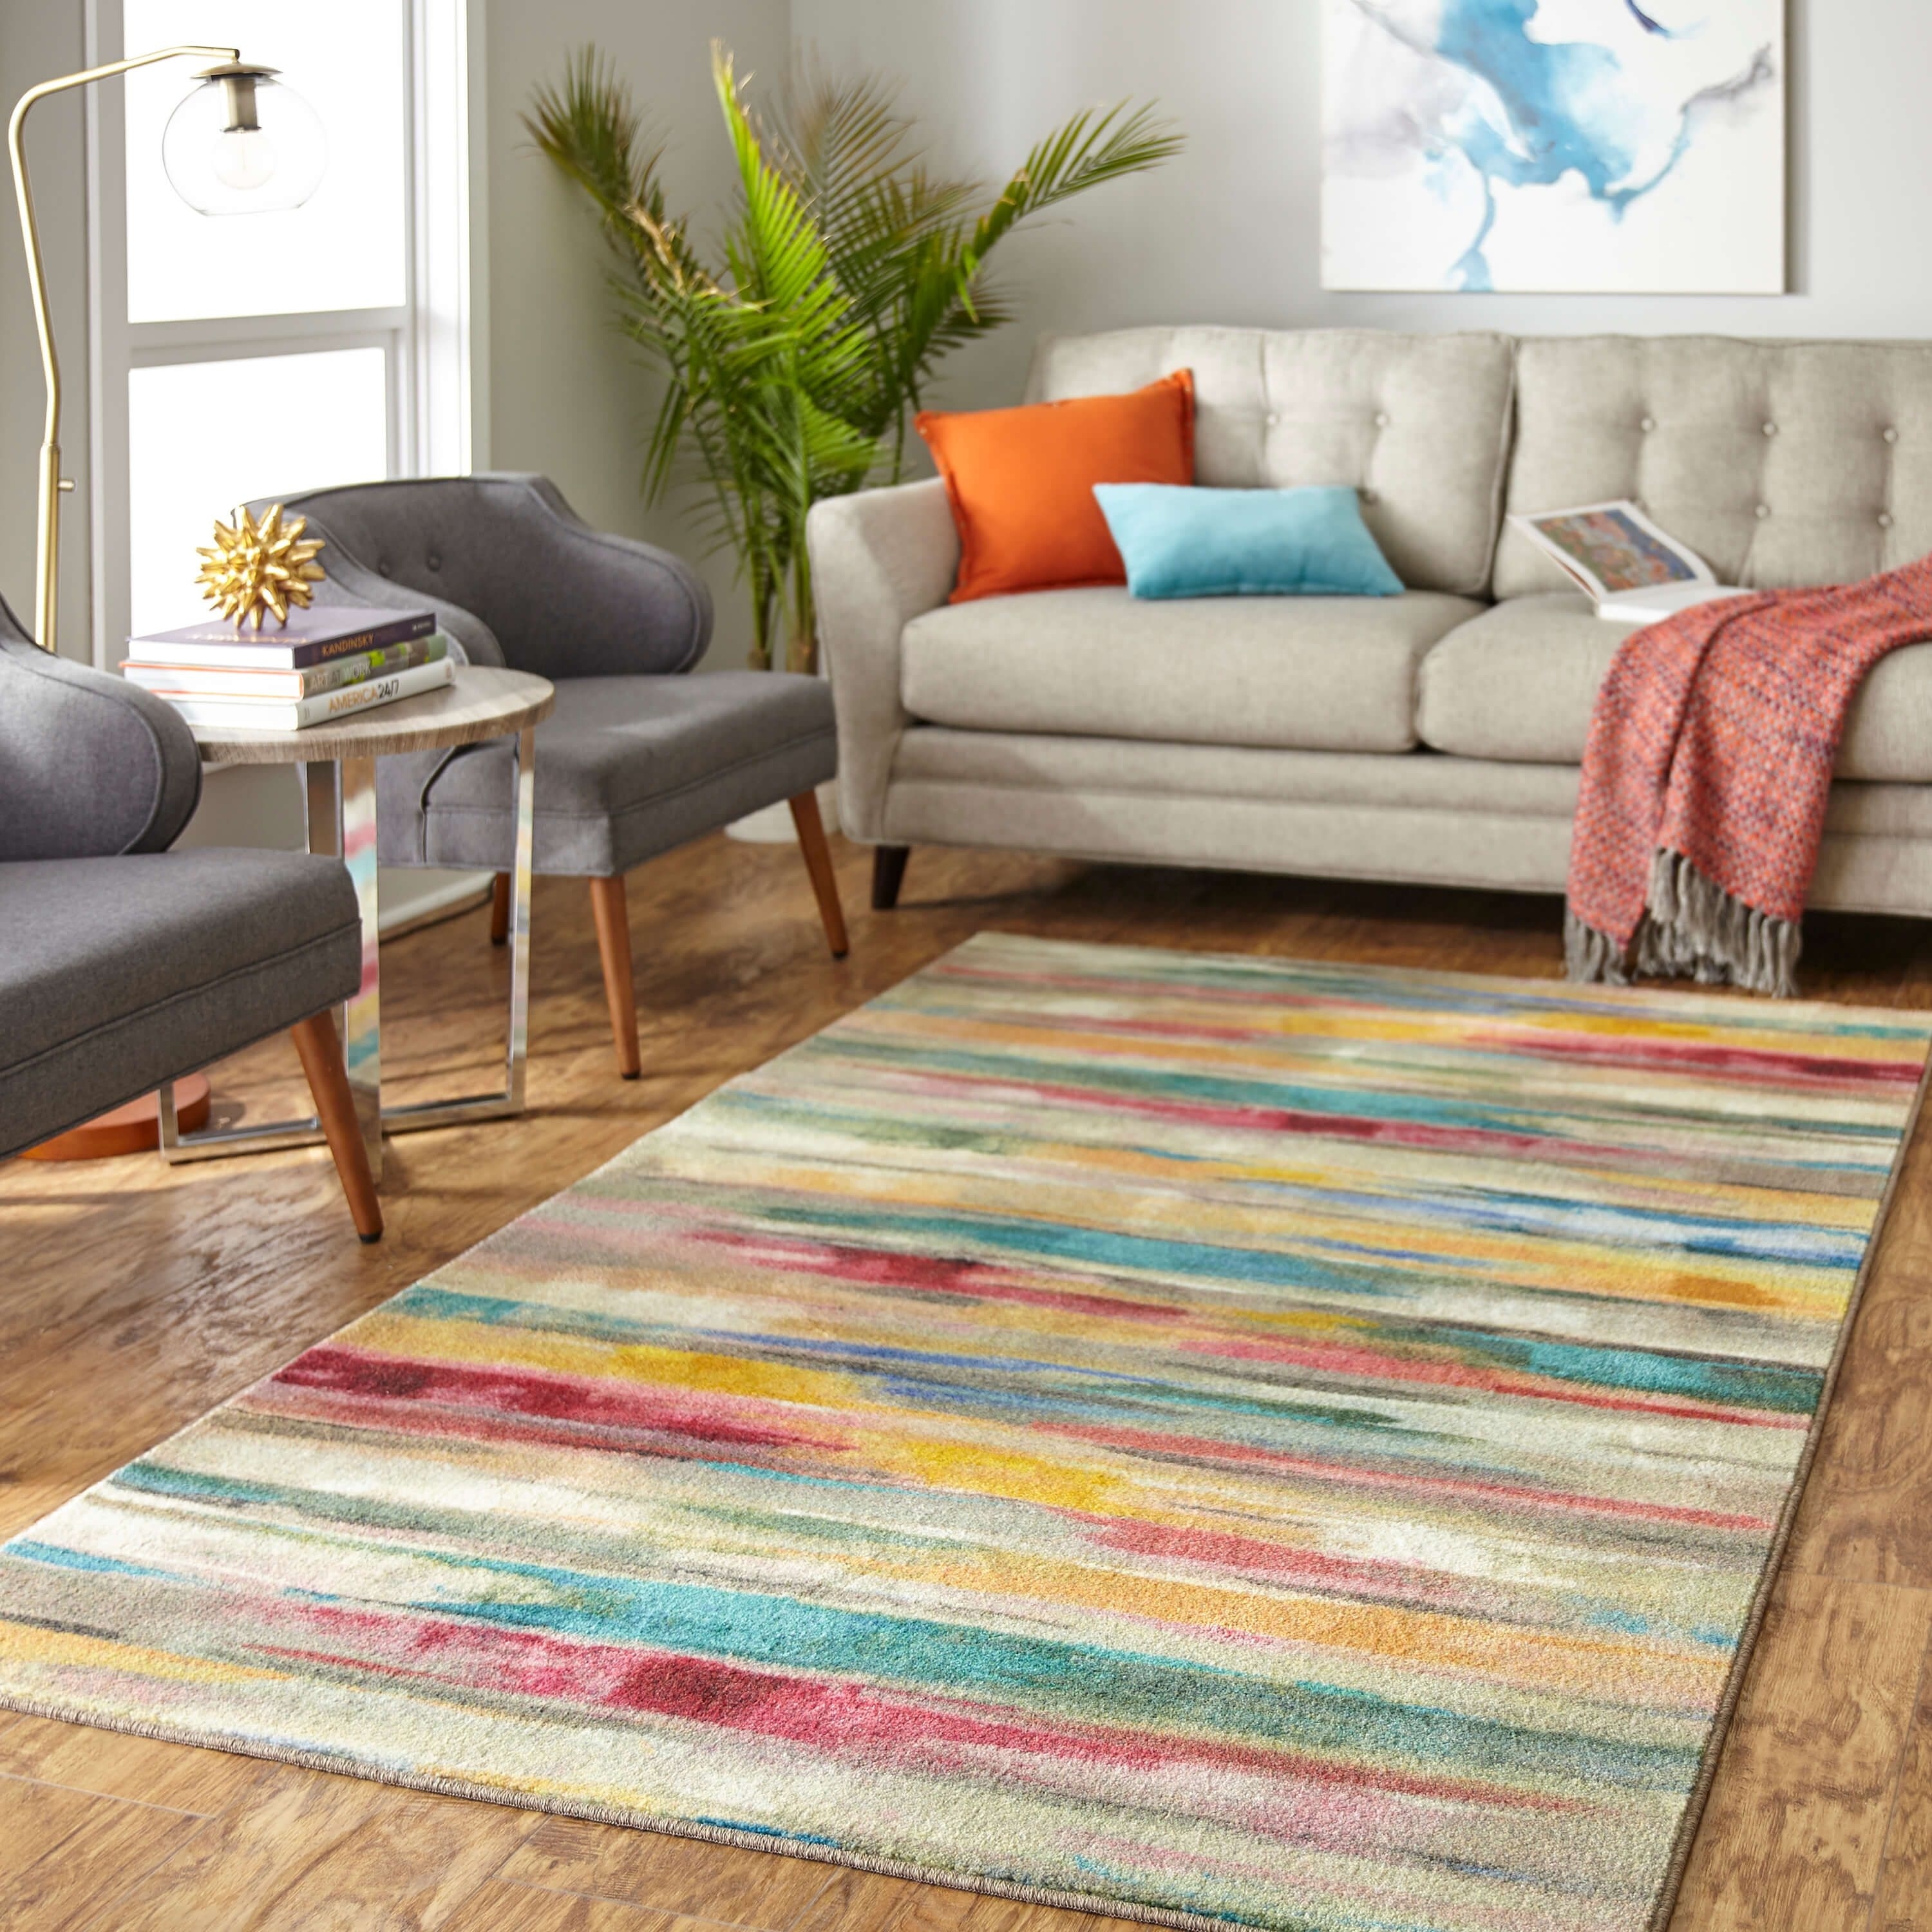 https://ak1.ostkcdn.com/images/products/is/images/direct/7bb8bcd55577a08a3c813293aad2c515466dcf81/Mohawk-Home-Spring-Window-Abstract-Stripe-Area-Rug.jpg